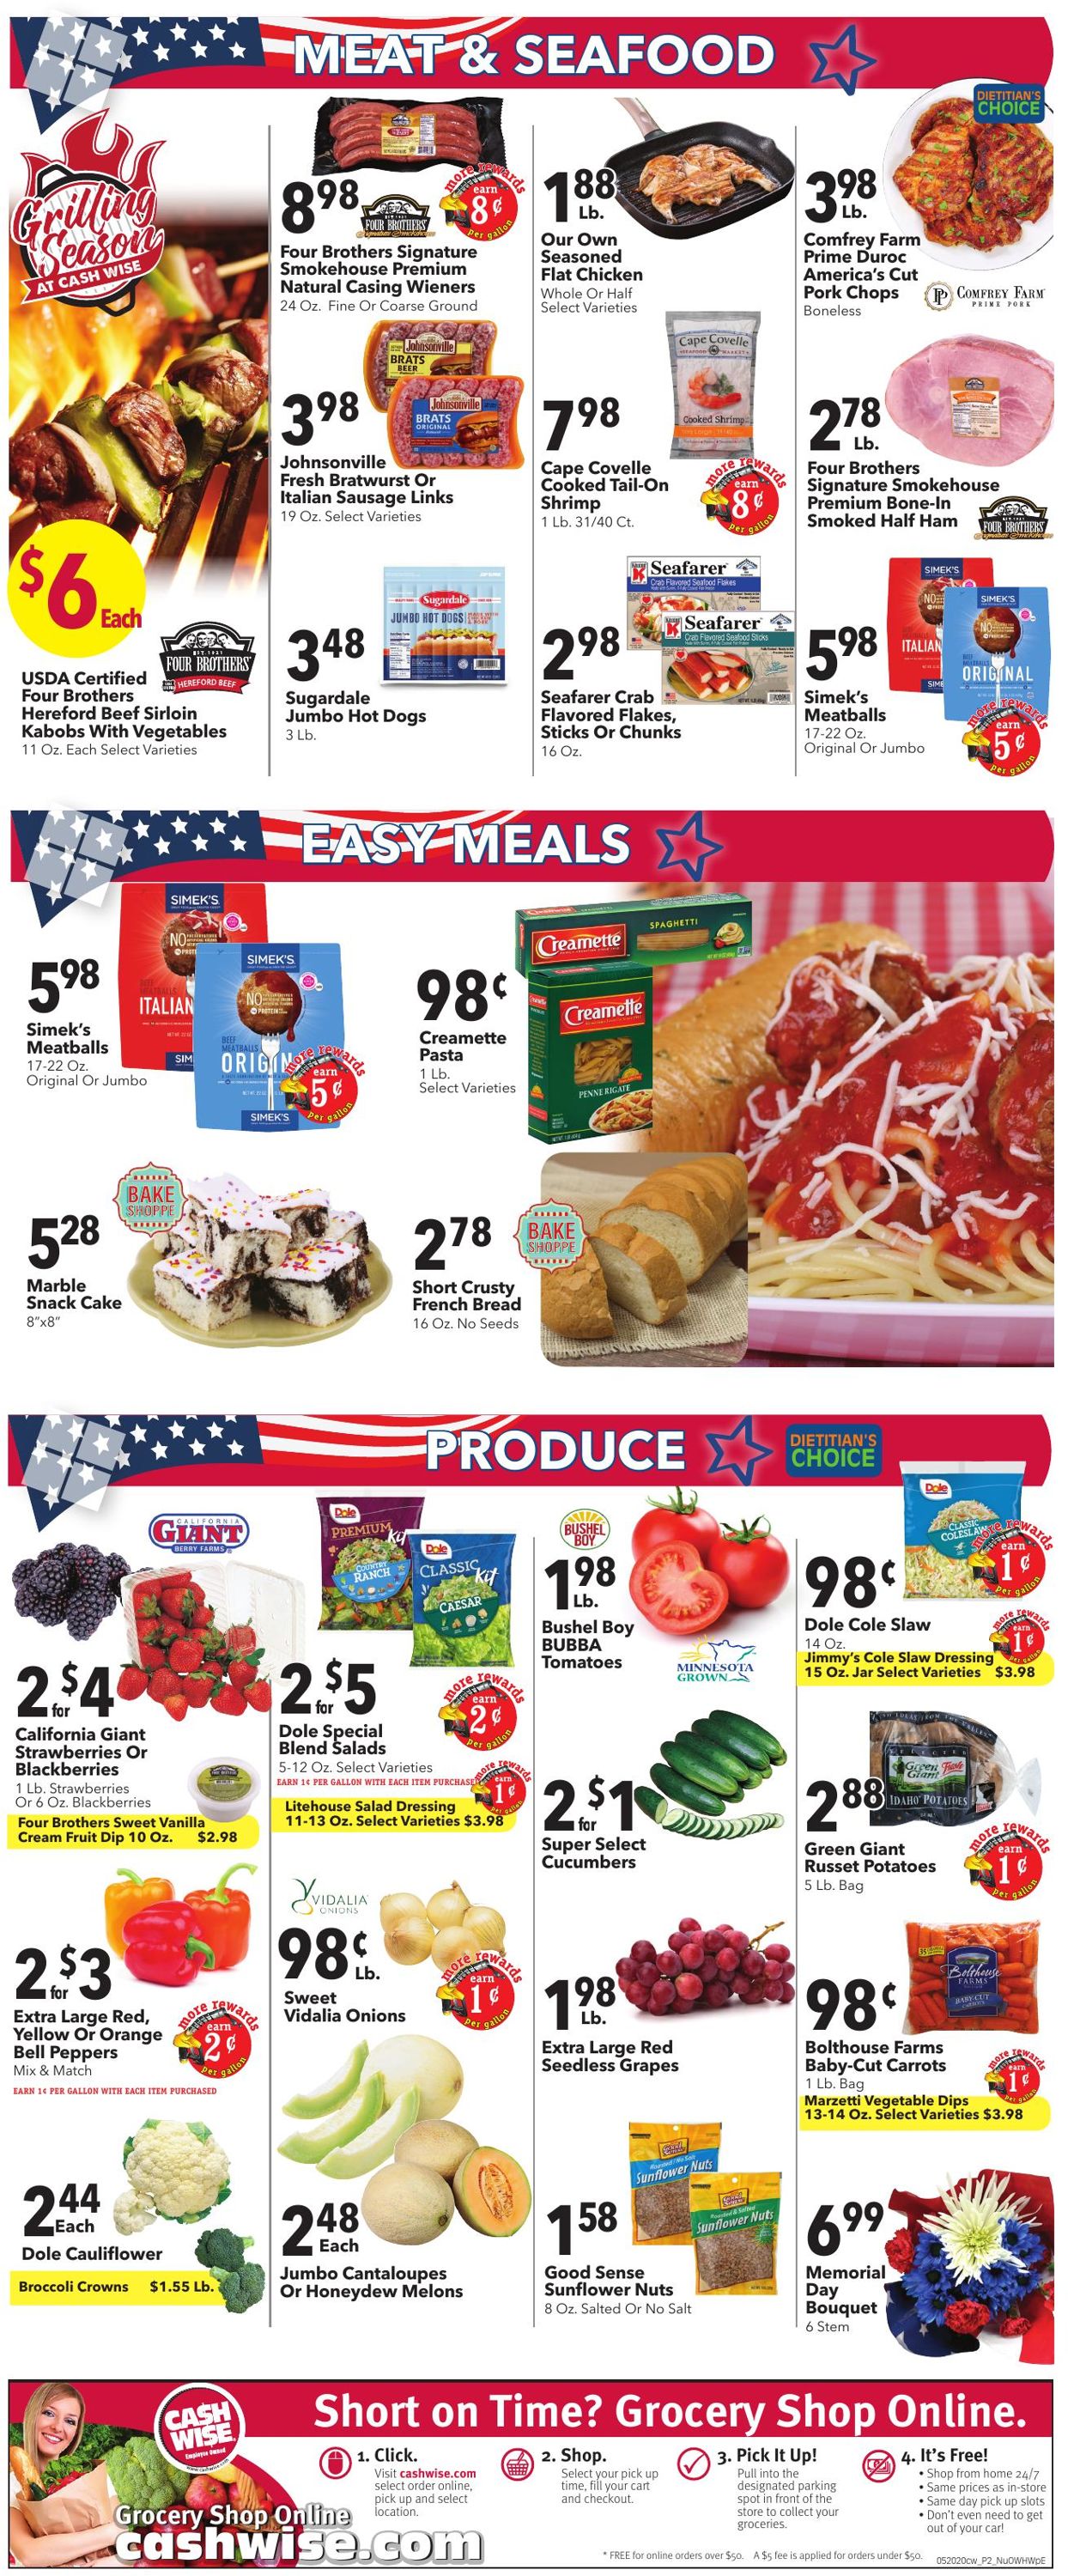 Cash Wise Weekly Ad Circular - valid 05/20-05/26/2020 (Page 2)